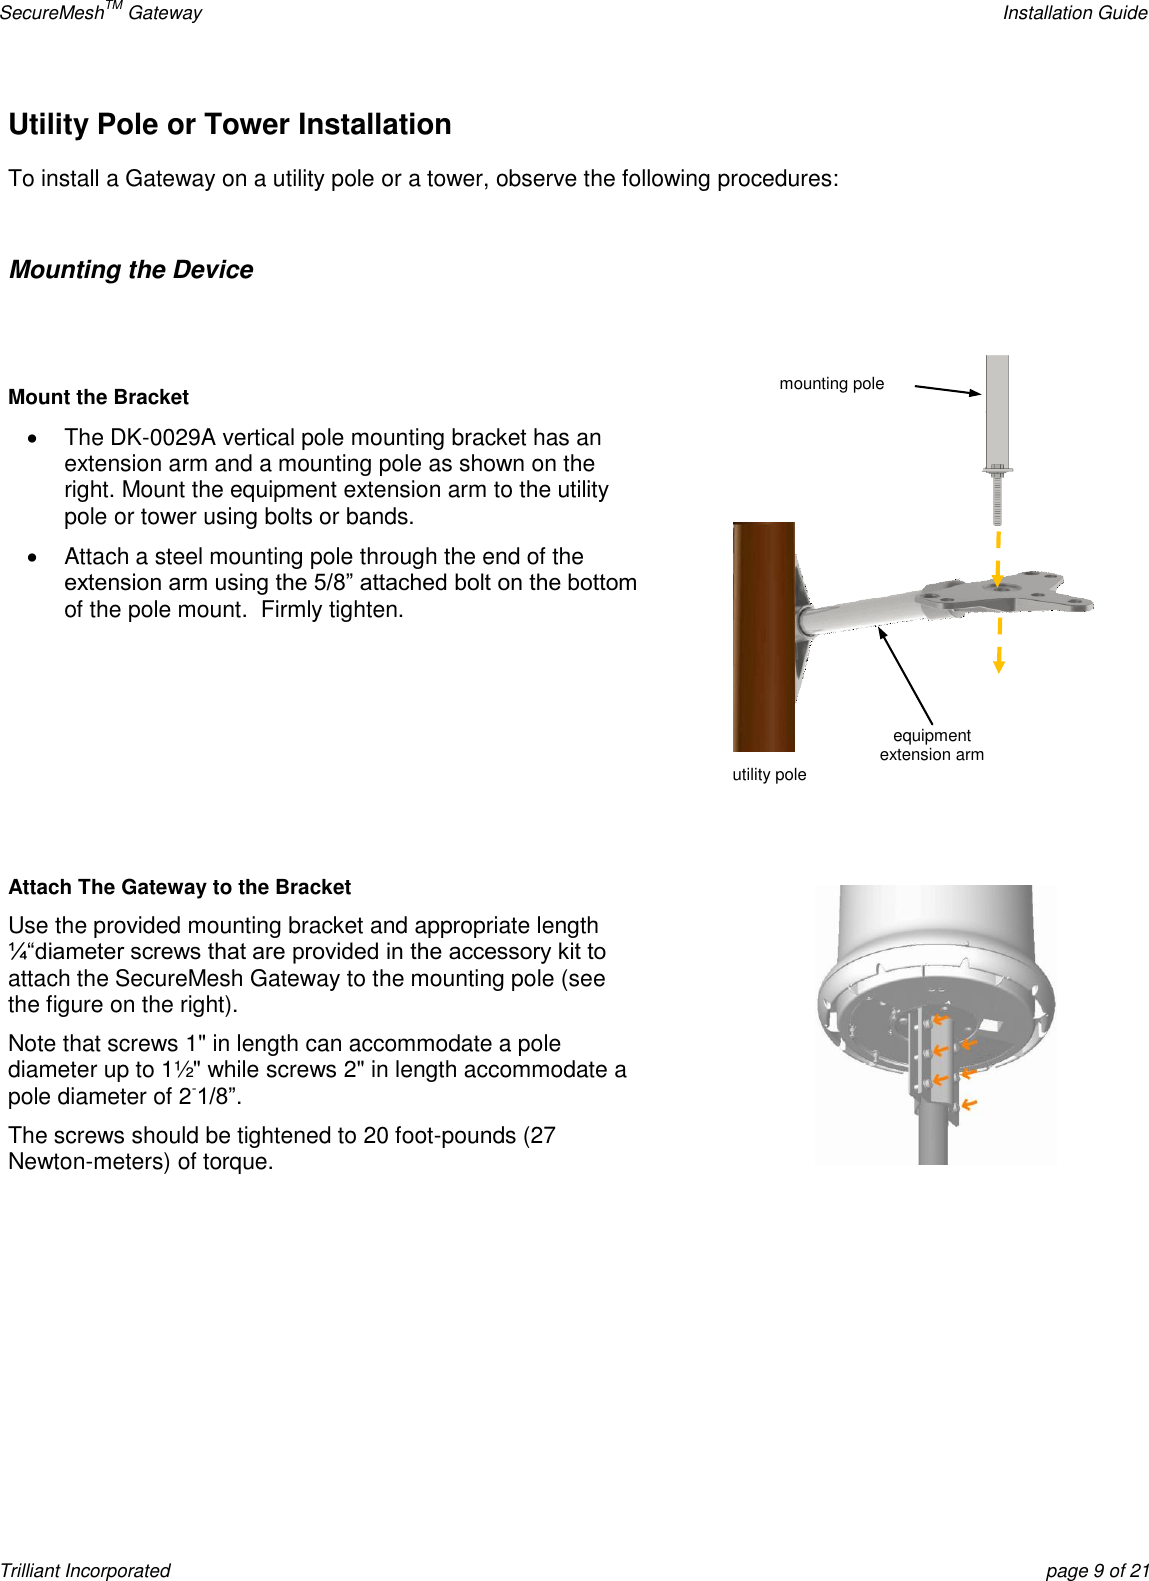 SecureMeshTM Gateway    Installation Guide Trilliant Incorporated  page 9 of 21 Utility Pole or Tower Installation  To install a Gateway on a utility pole or a tower, observe the following procedures:  Mounting the Device   Mount the Bracket   The DK-0029A vertical pole mounting bracket has an extension arm and a mounting pole as shown on the right. Mount the equipment extension arm to the utility pole or tower using bolts or bands.   Attach a steel mounting pole through the end of the extension arm using the 5/8‖ attached bolt on the bottom of the pole mount.  Firmly tighten.     Attach The Gateway to the Bracket Use the provided mounting bracket and appropriate length ¼―diameter screws that are provided in the accessory kit to attach the SecureMesh Gateway to the mounting pole (see the figure on the right).   Note that screws 1&quot; in length can accommodate a pole diameter up to 1½&quot; while screws 2&quot; in length accommodate a pole diameter of 2-1/8‖. The screws should be tightened to 20 foot-pounds (27 Newton-meters) of torque.      equipment  extension arm utility pole mounting pole 